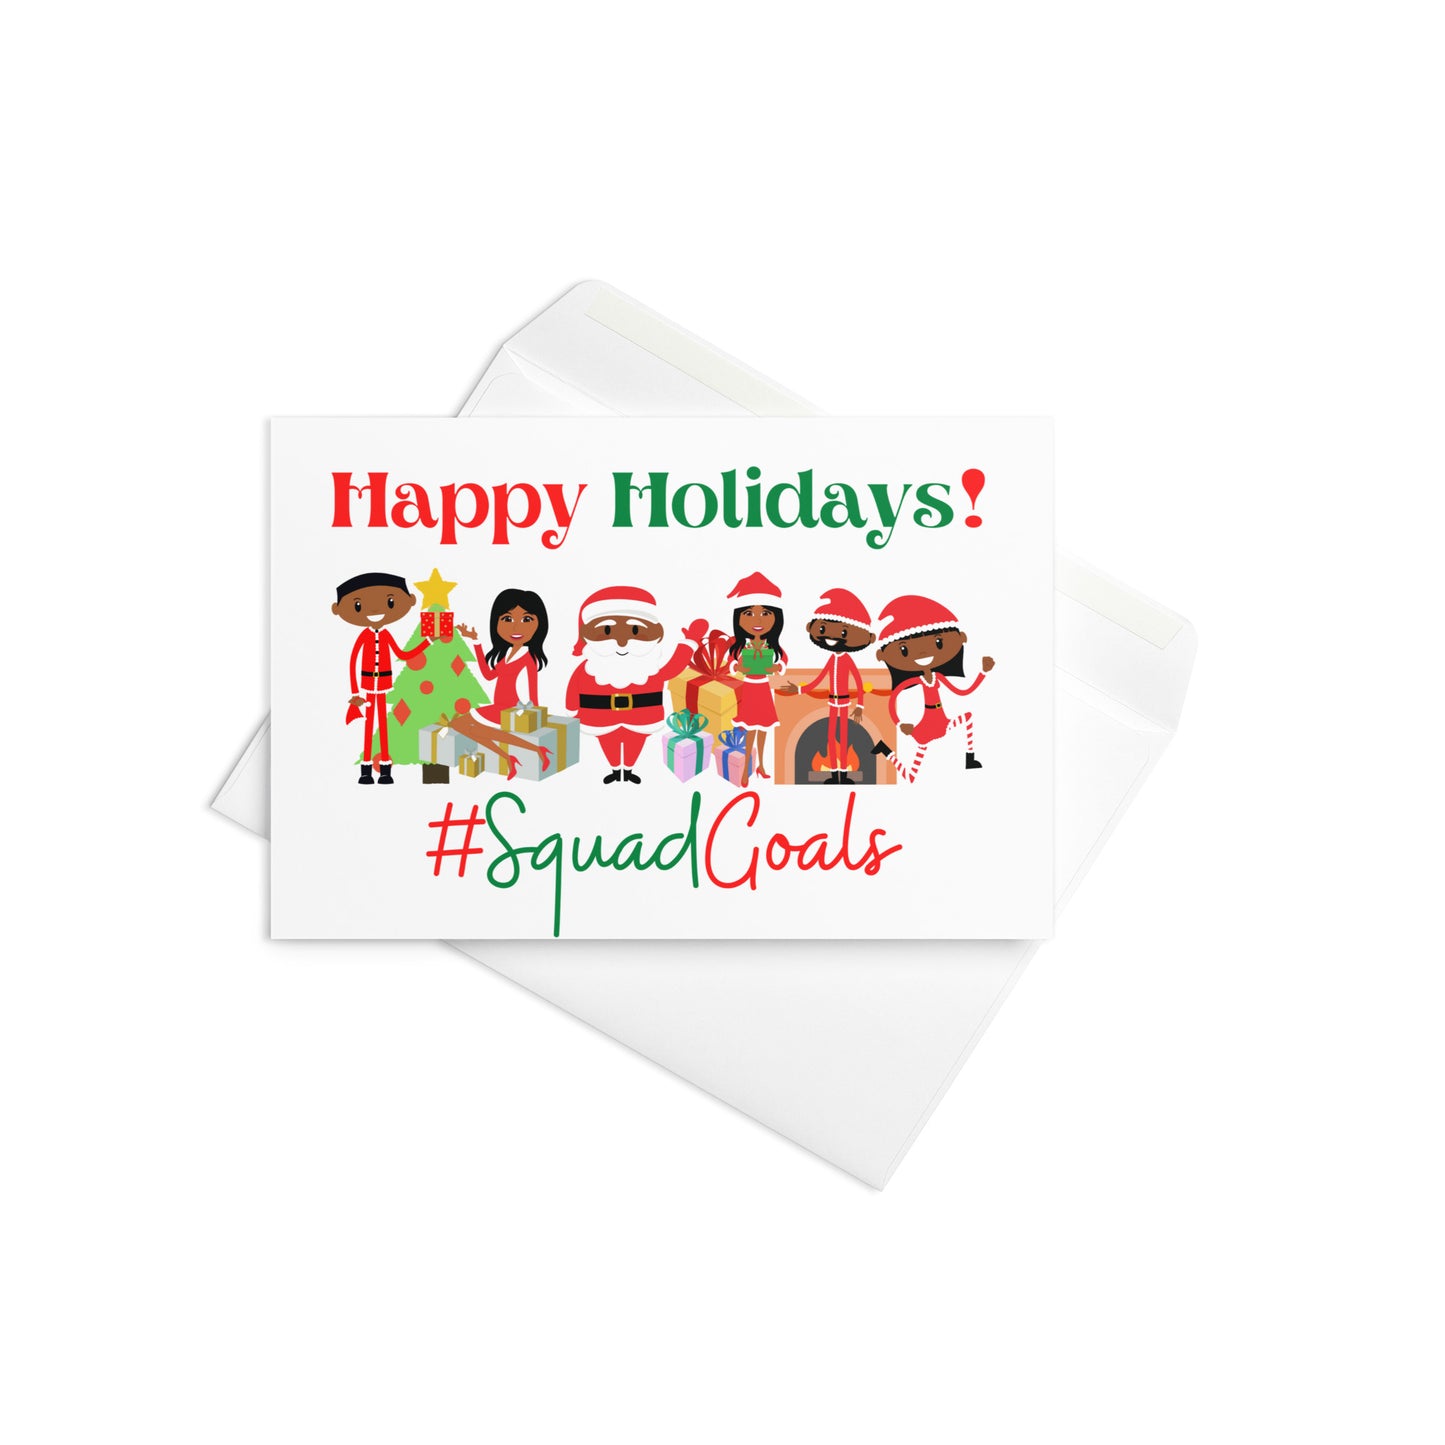 #SquadGoals Greeting card- Set of 10 Blank Greeting Cards and Envelopes